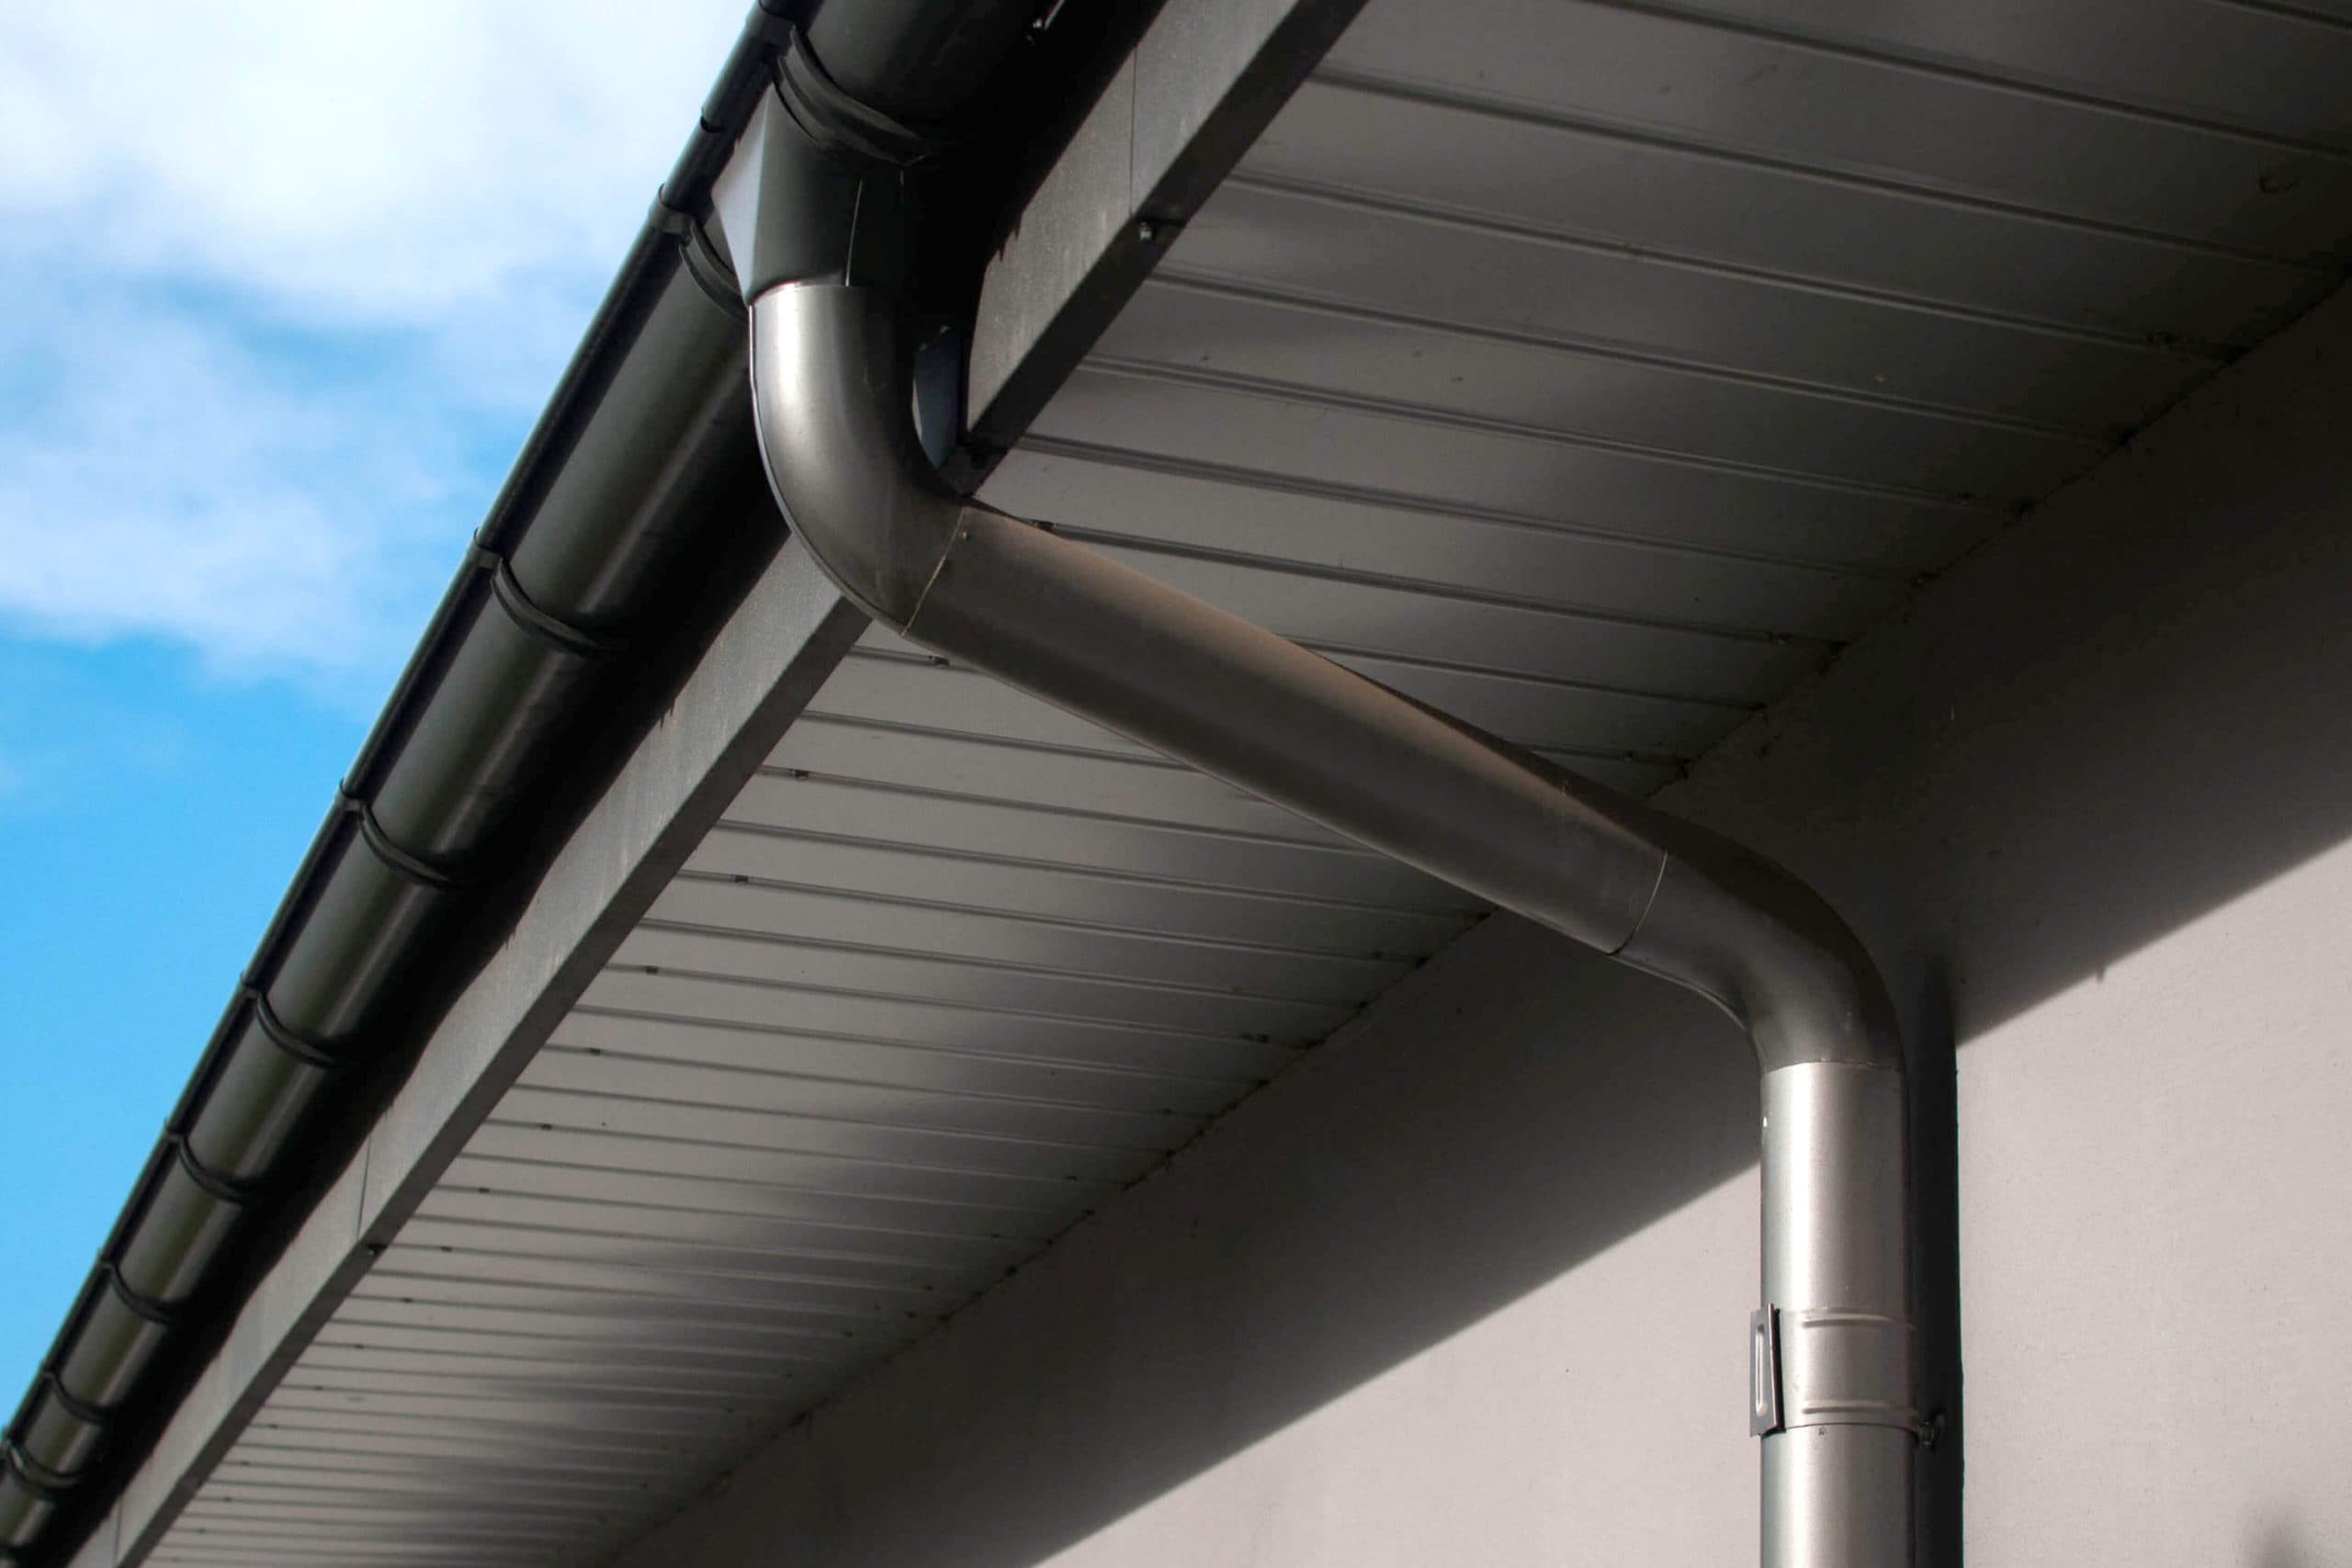 Reliable and affordable Galvanized gutters installation in Boone